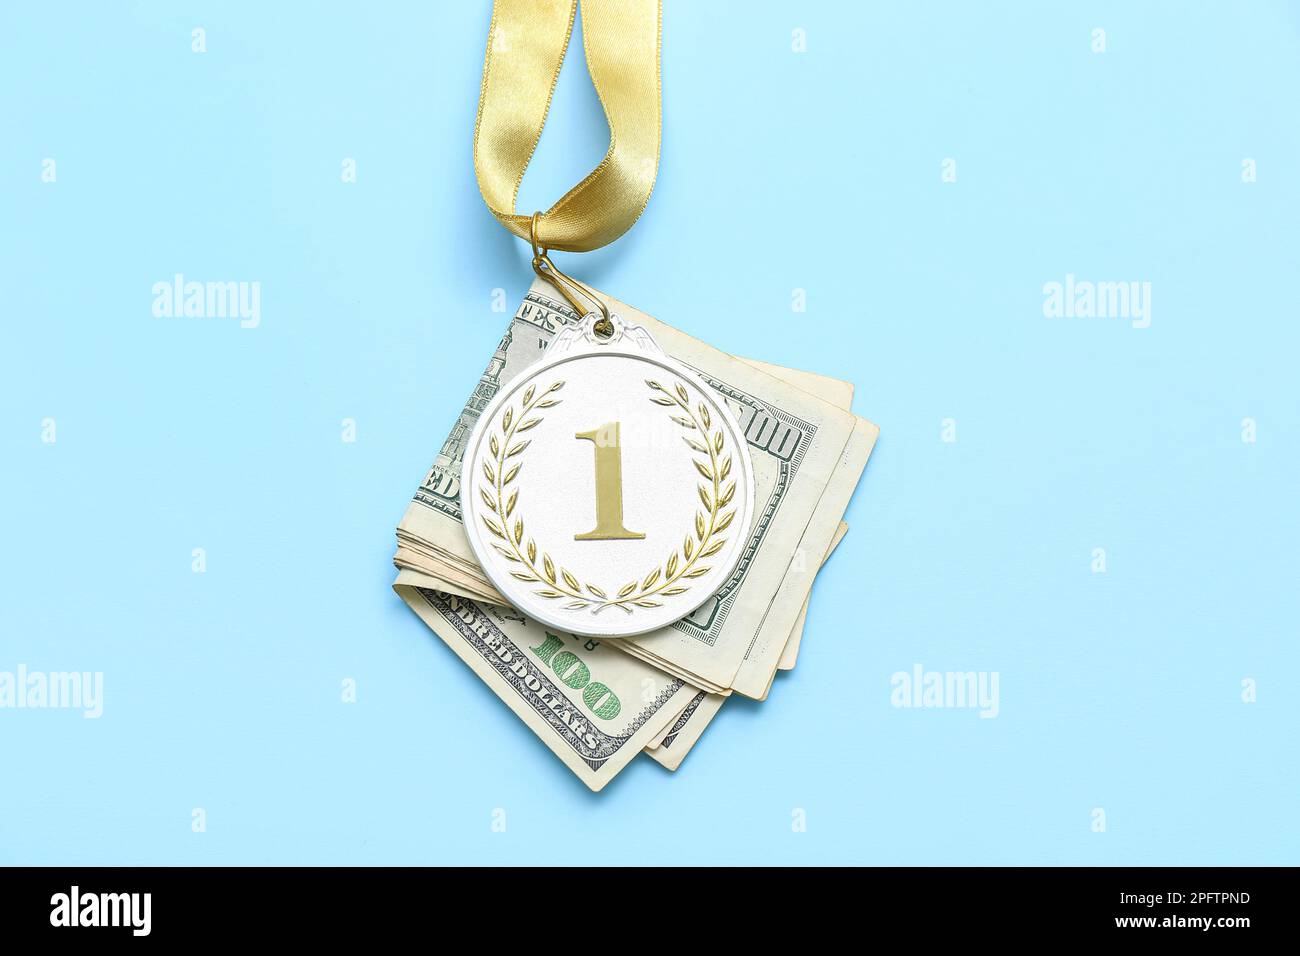 First place medal with money on blue background Stock Photo